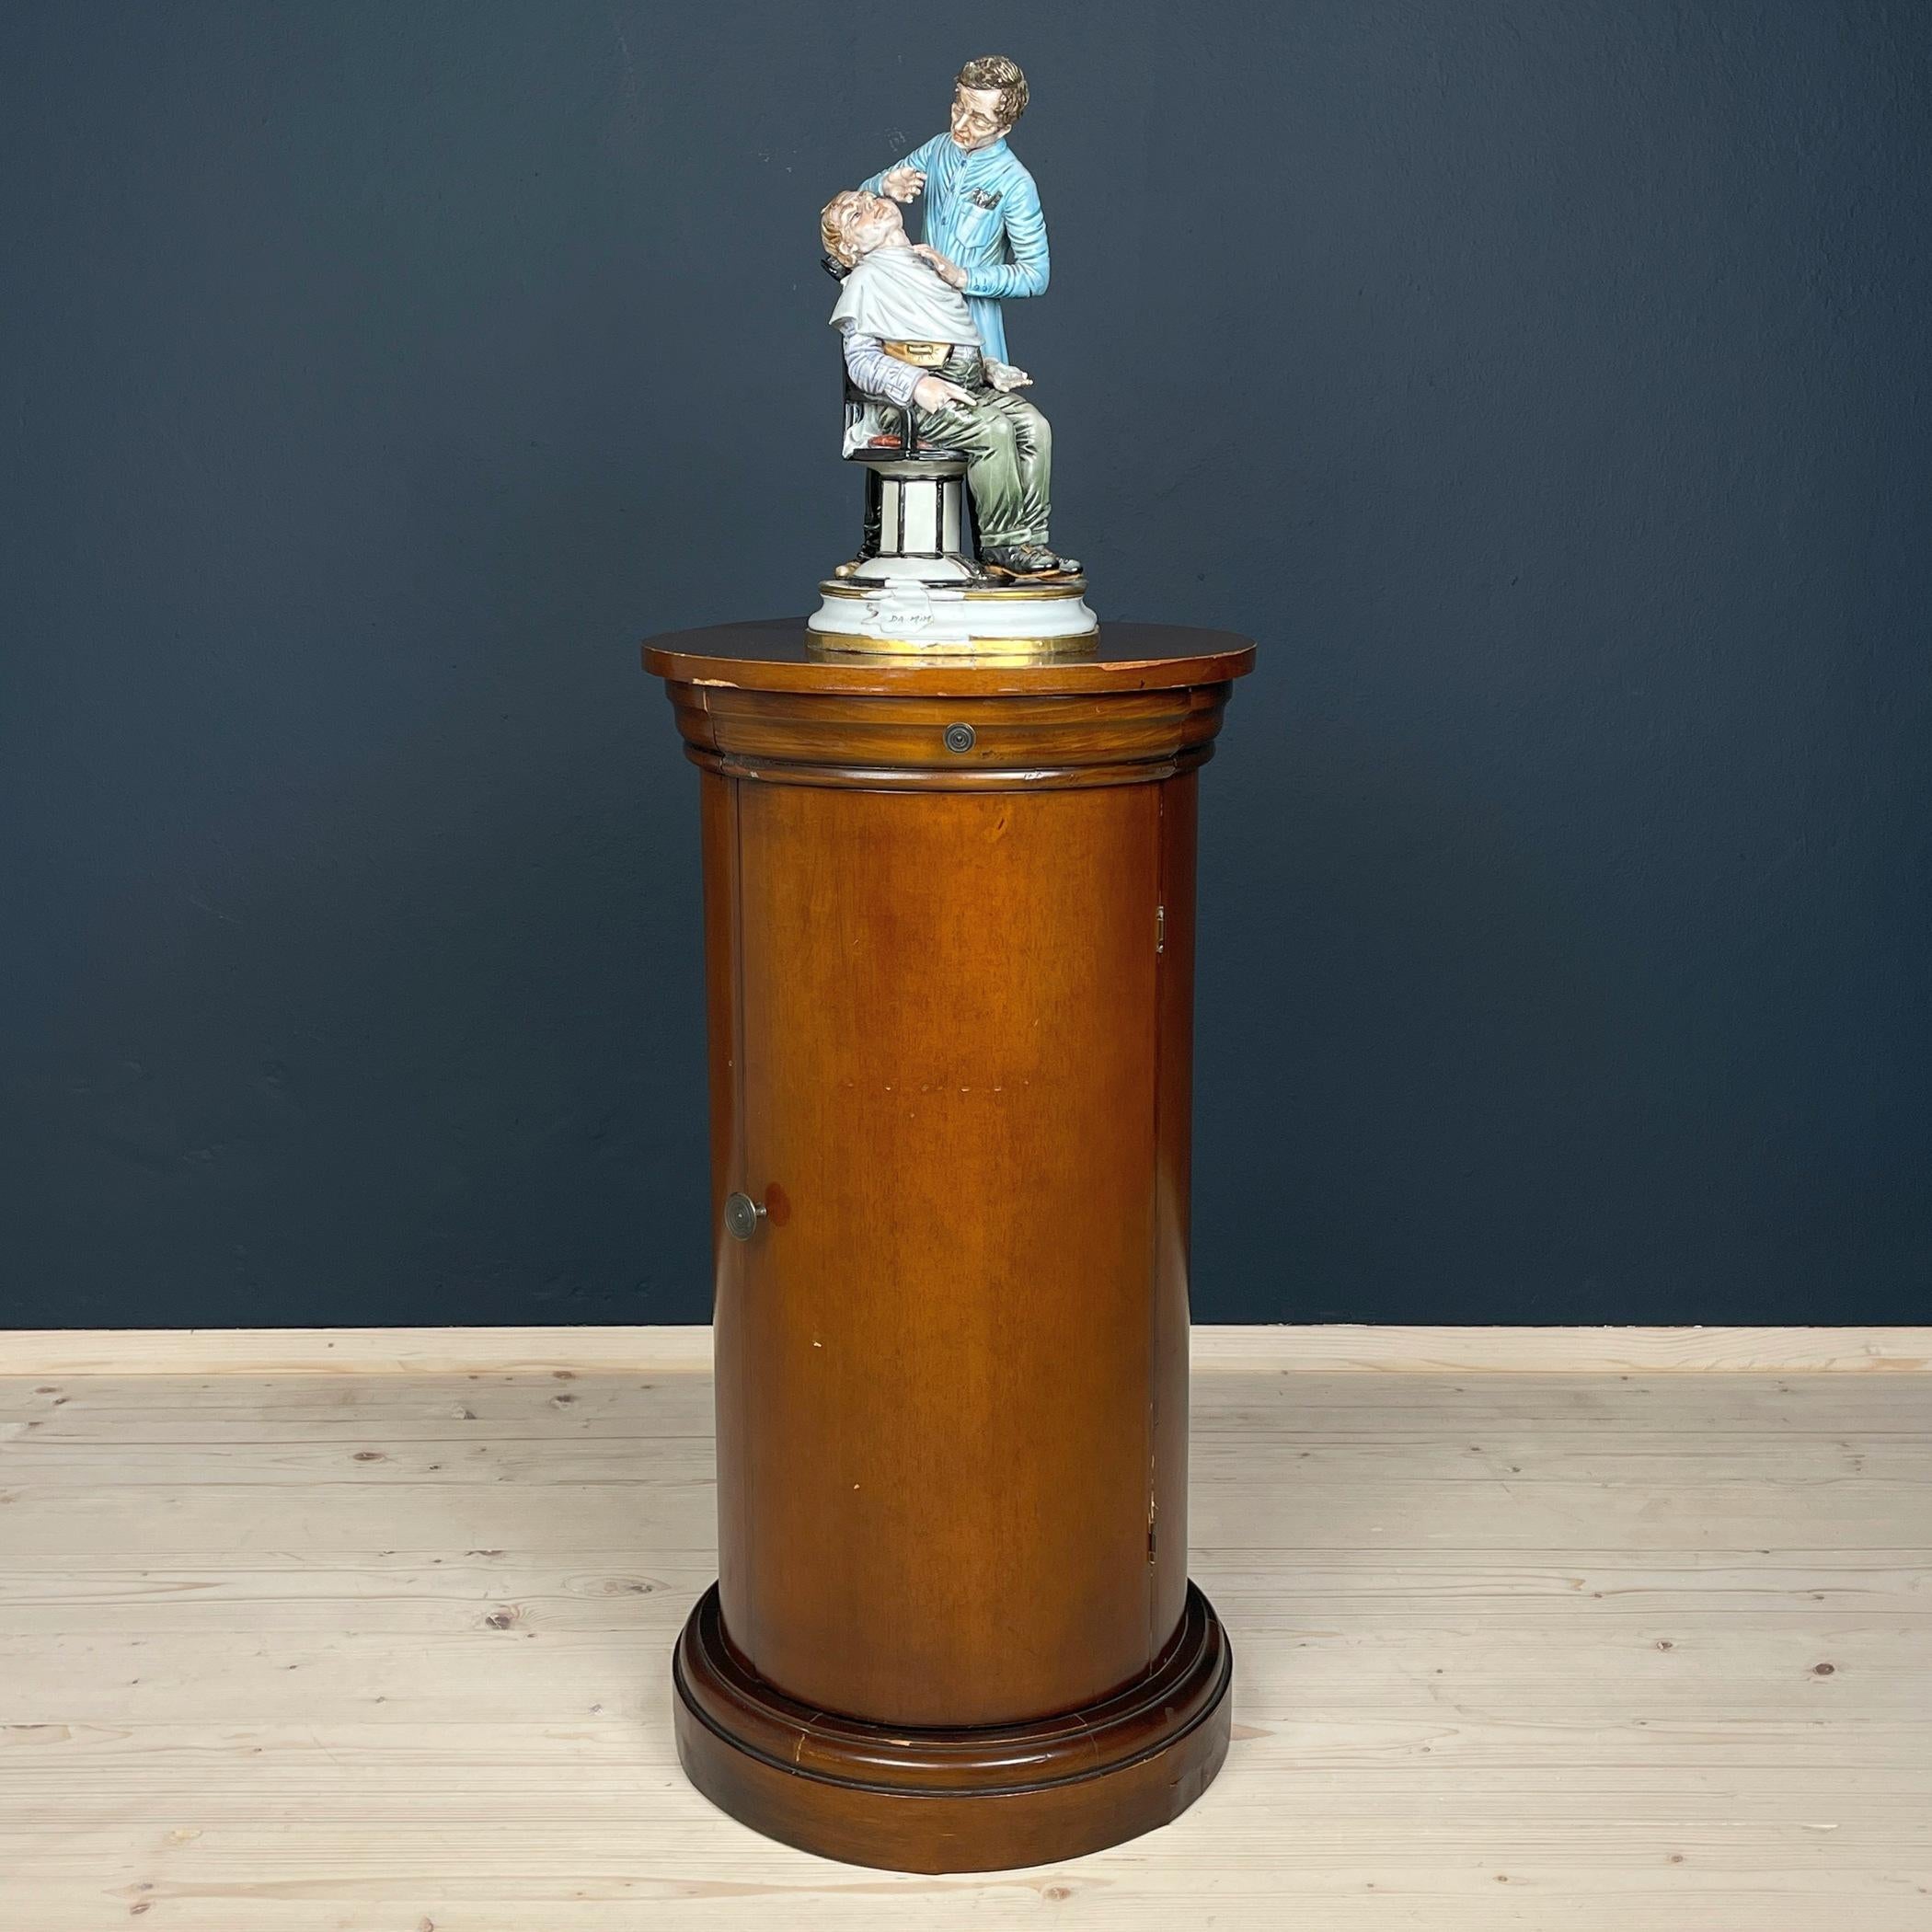 This exquisite oval pedestal cabinet hails from 1970s Italy, showcasing meticulous craftsmanship. Constructed from solid wood and plywood, it boasts original fittings that add to its authenticity and charm. Remarkably, this pedestal cabinet has